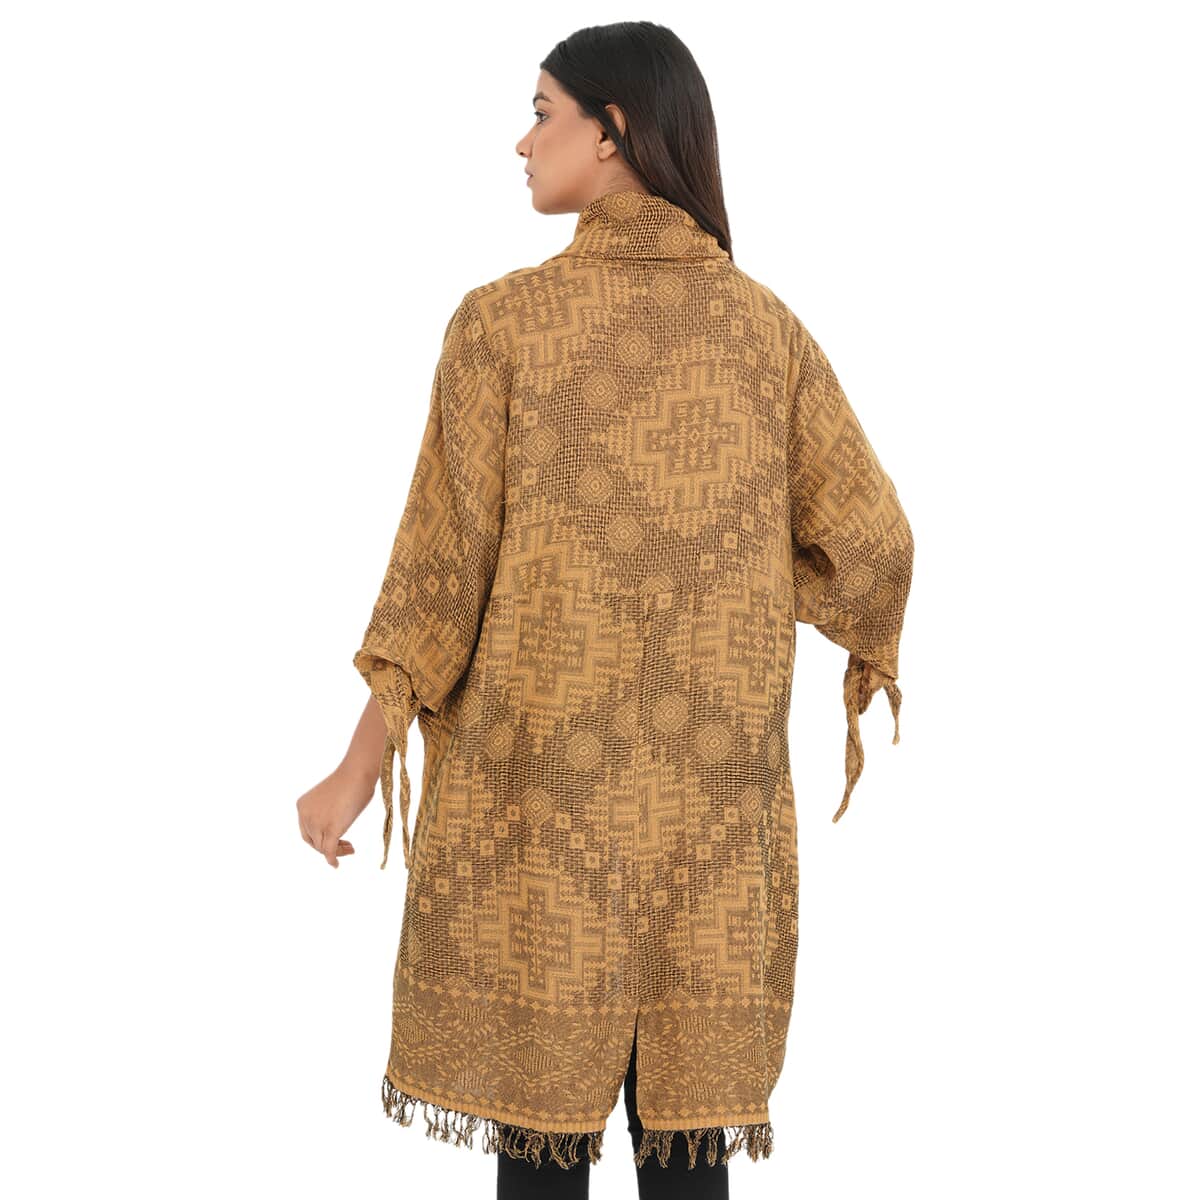 Passage Gold 100% Cotton Double Layer Jacquard Front Waterfall Cardigan - One size Plus, Cotton Cardigan, Women Cardigan, Maxi Cardigan, Summer Cardigan image number 1